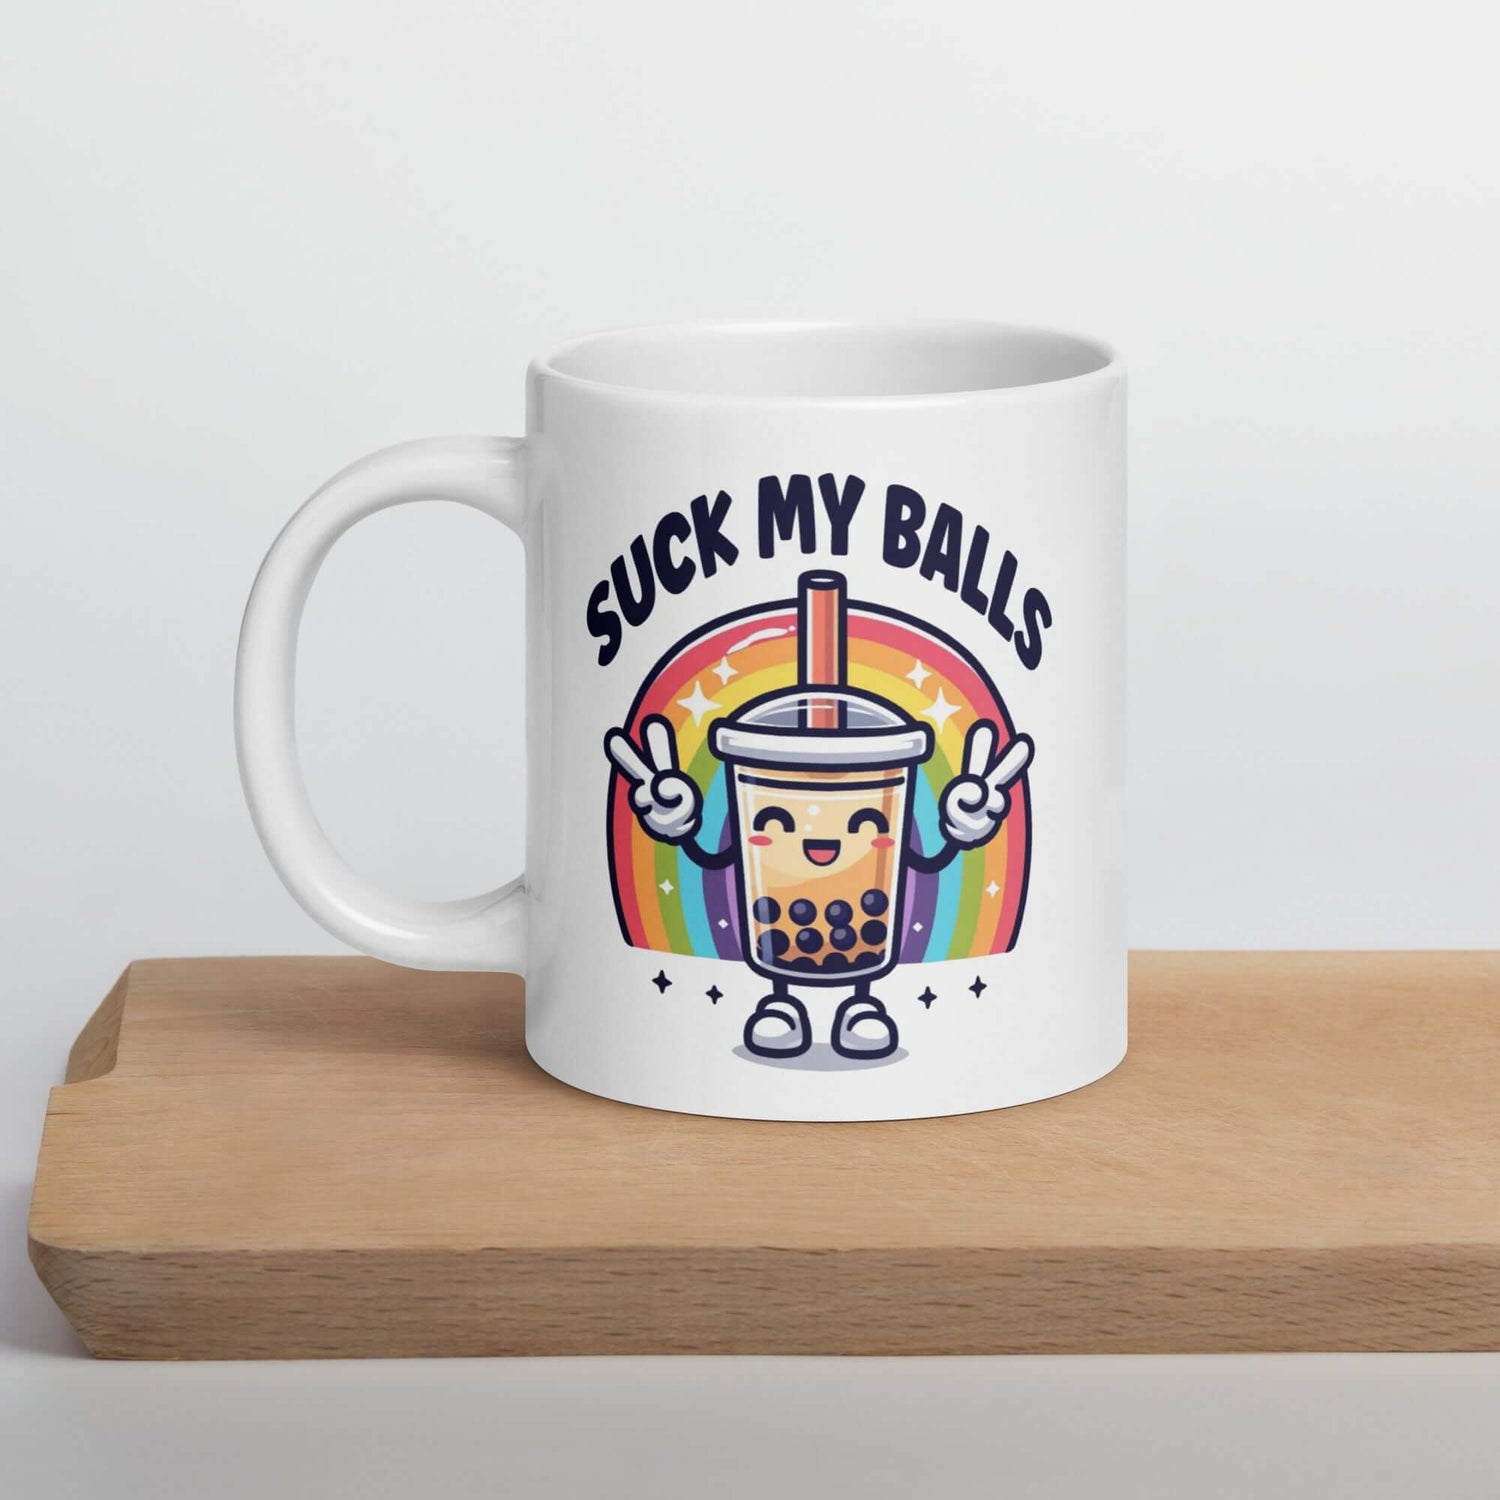 White ceramic mug with graphics of a rainbow and a smiling boba bubble tea. The bubble tea has arms and legs. The phrase Suck my balls is printed above the rainbow. The graphics are on both sides of the mug